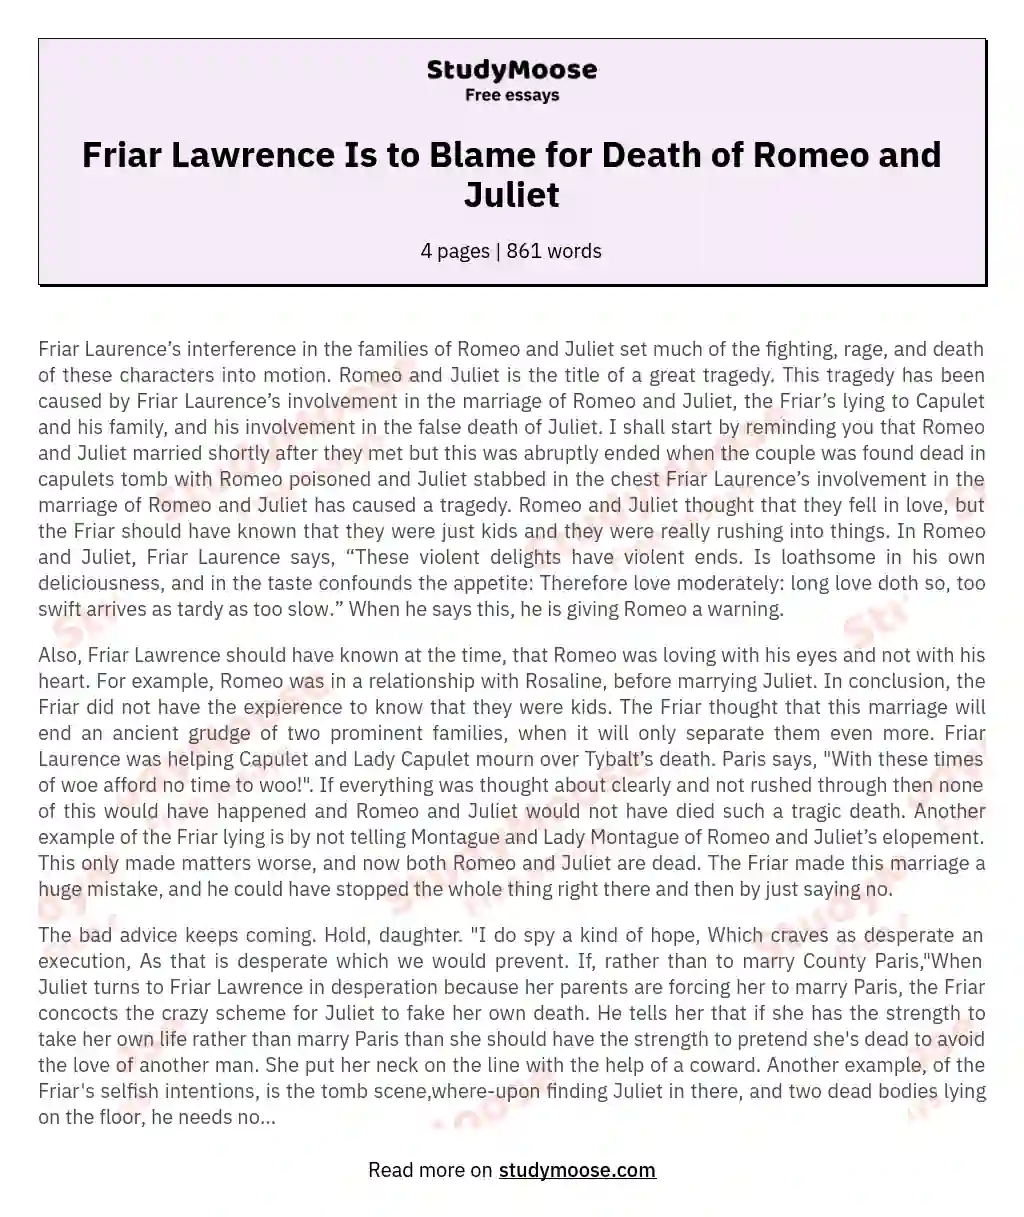 Friar Lawrence Is to Blame for Death of Romeo and Juliet essay